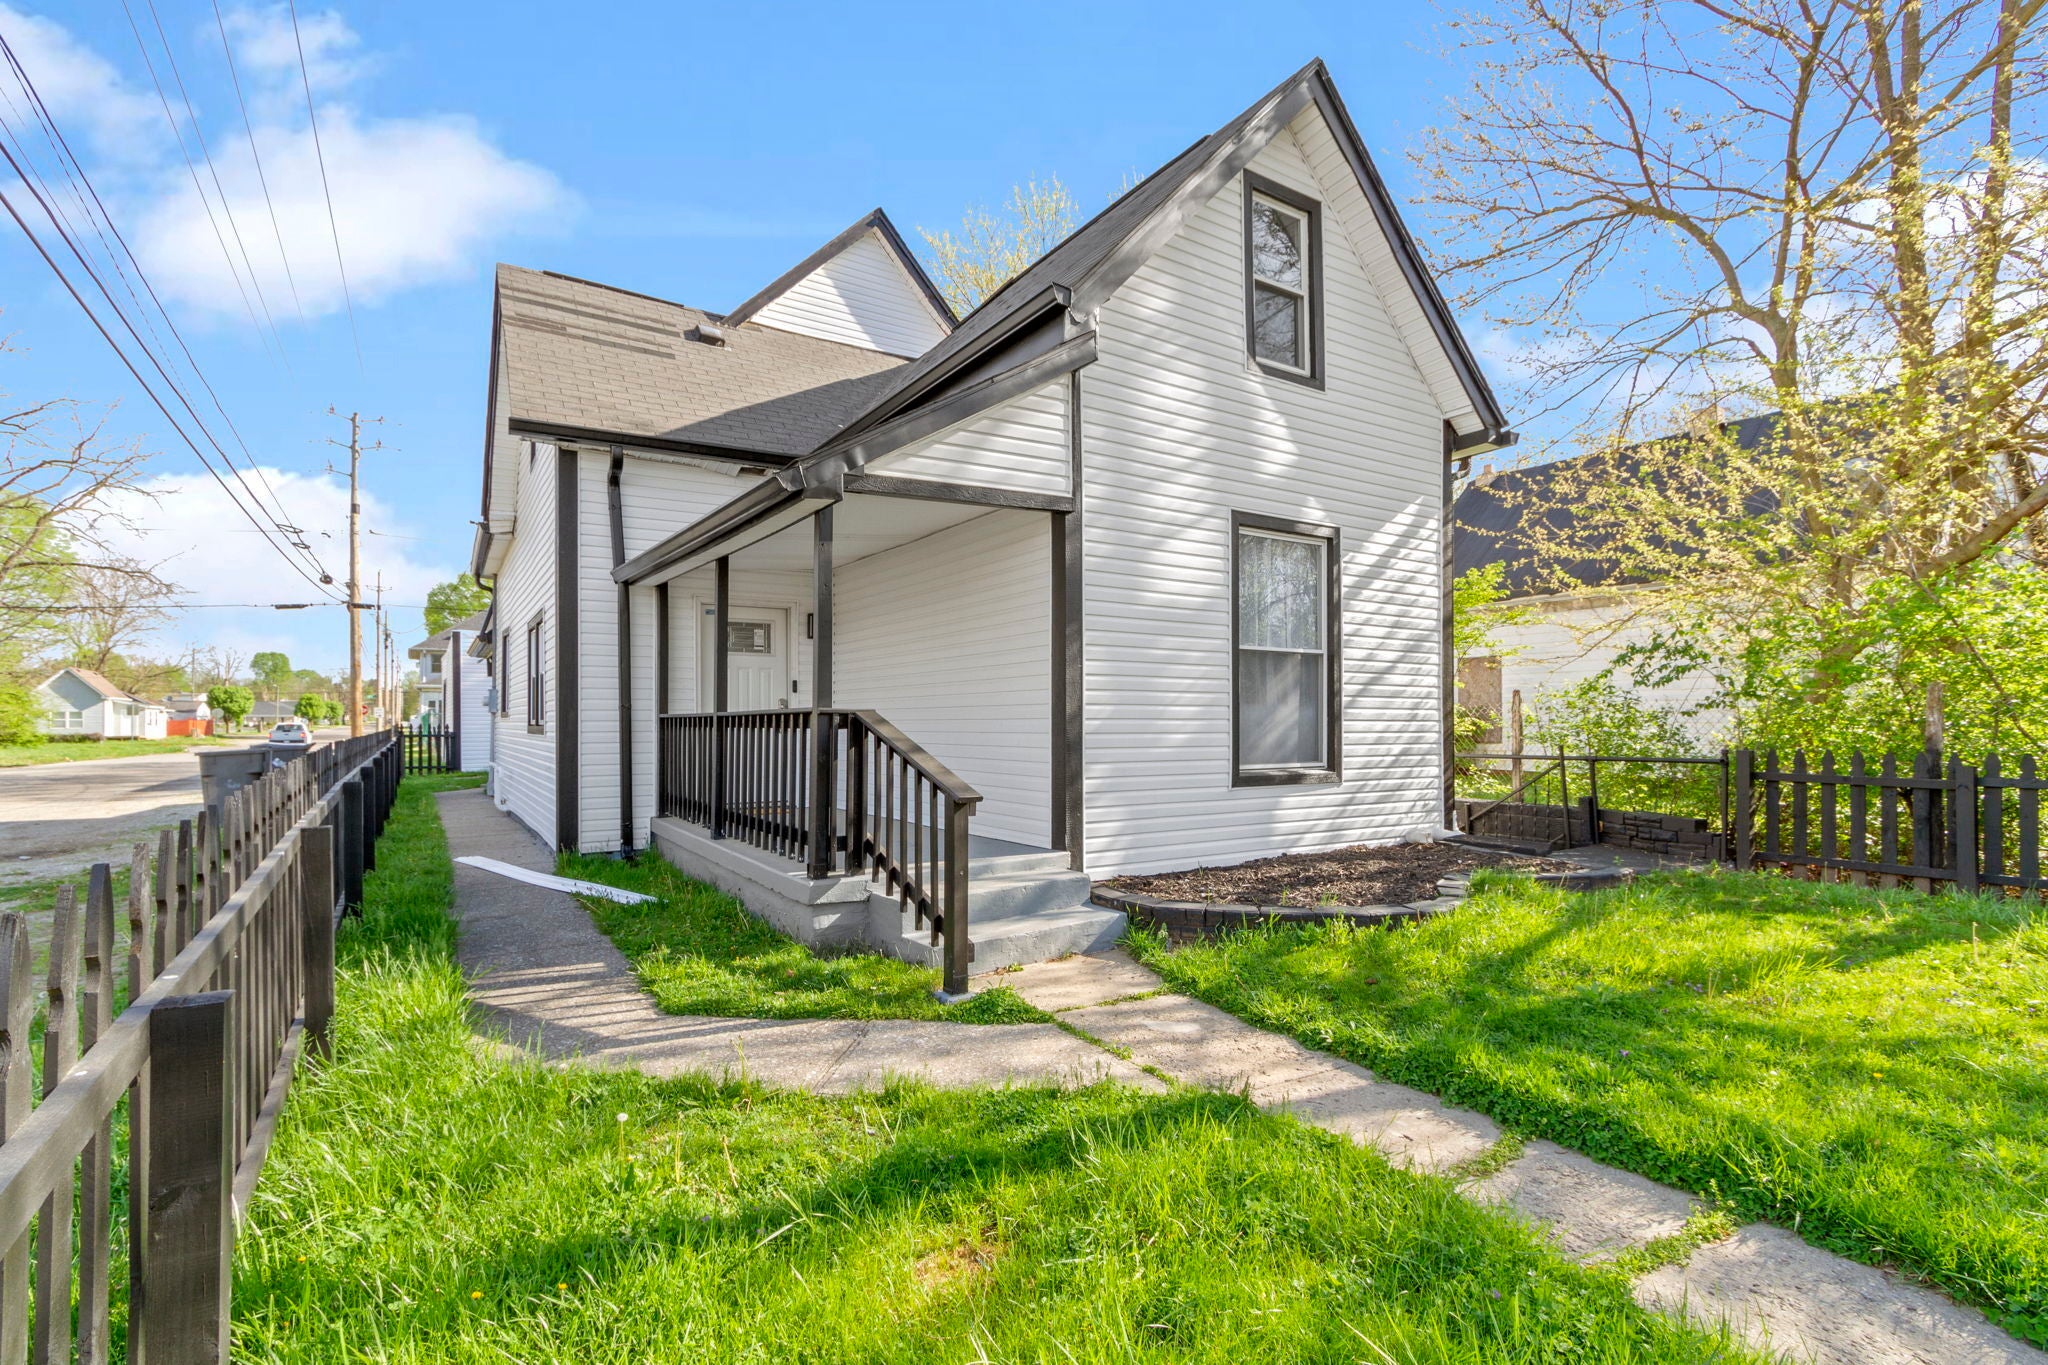 Photo of 1176 Udell Street Indianapolis, IN 46208